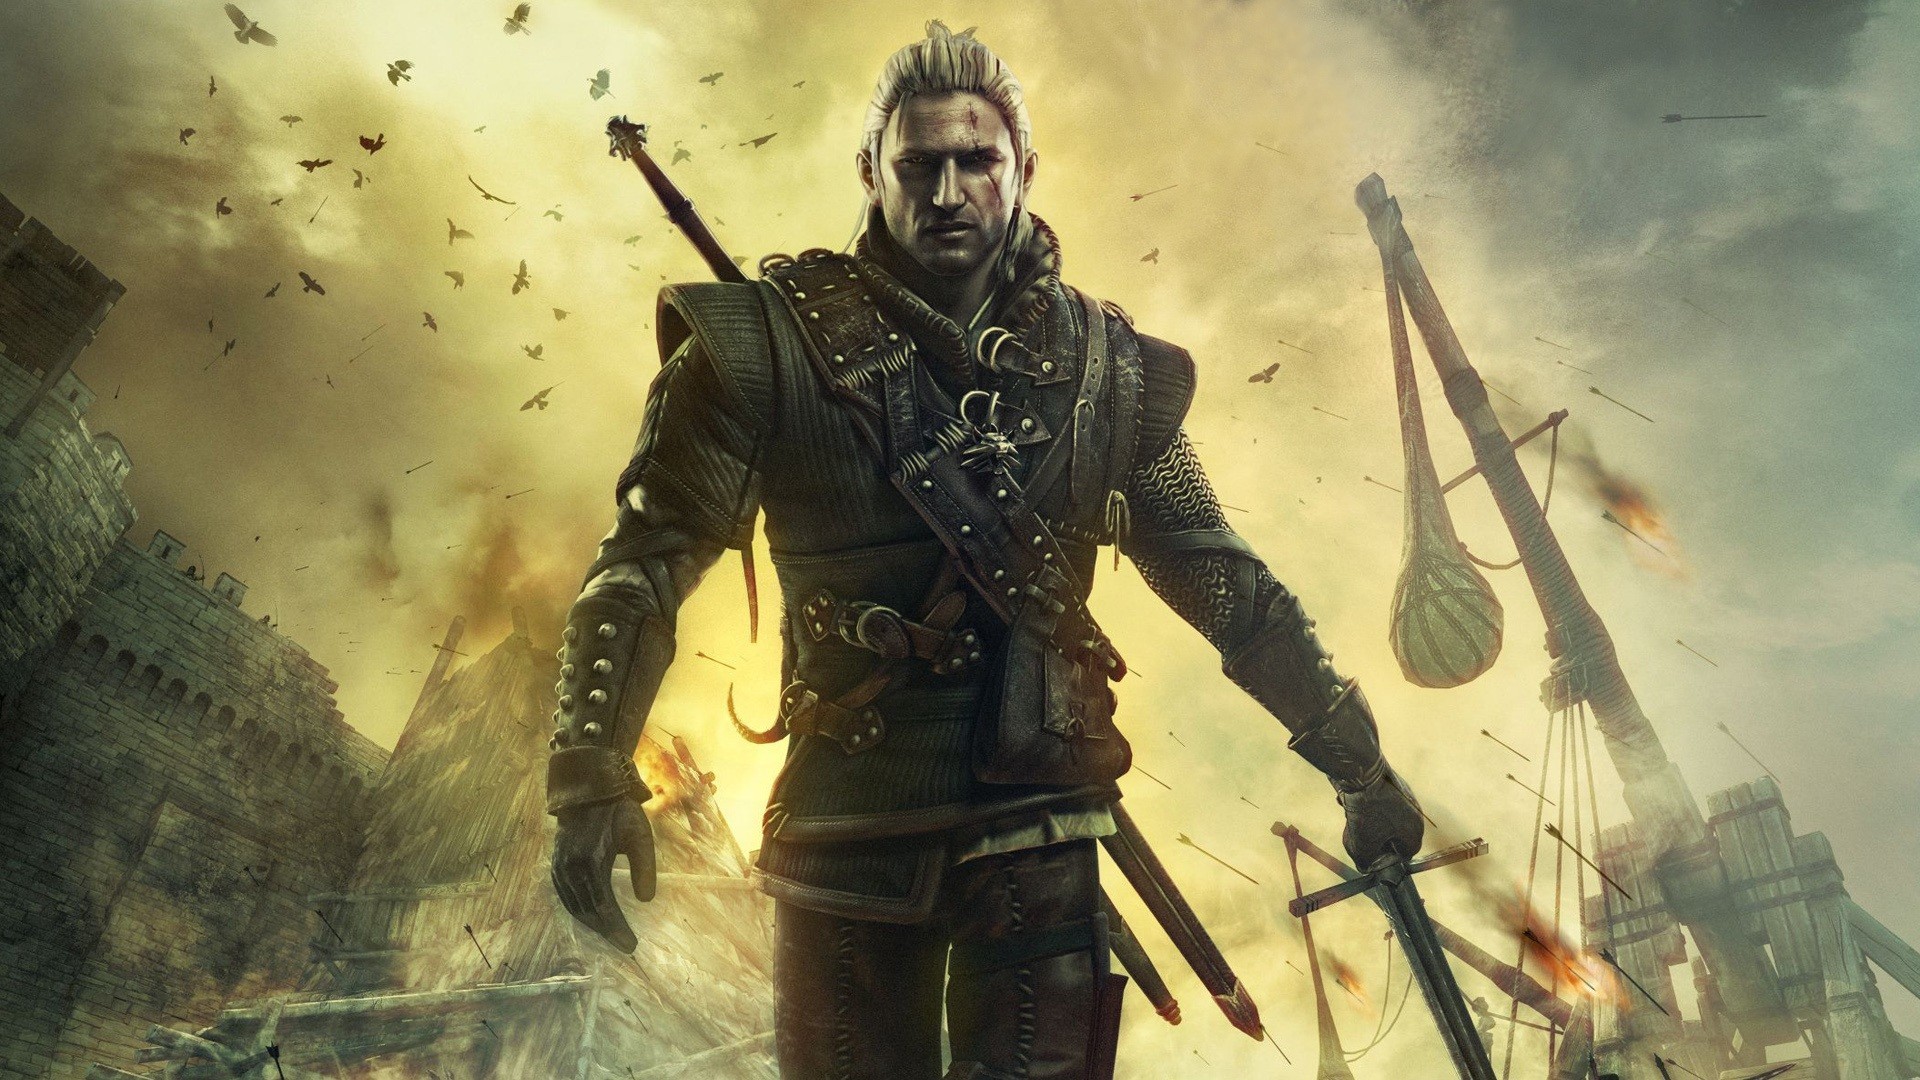 General 1920x1080 The Witcher video games The Witcher 2: Assassins of Kings RPG Geralt of Rivia video game art PC gaming fantasy men video game men